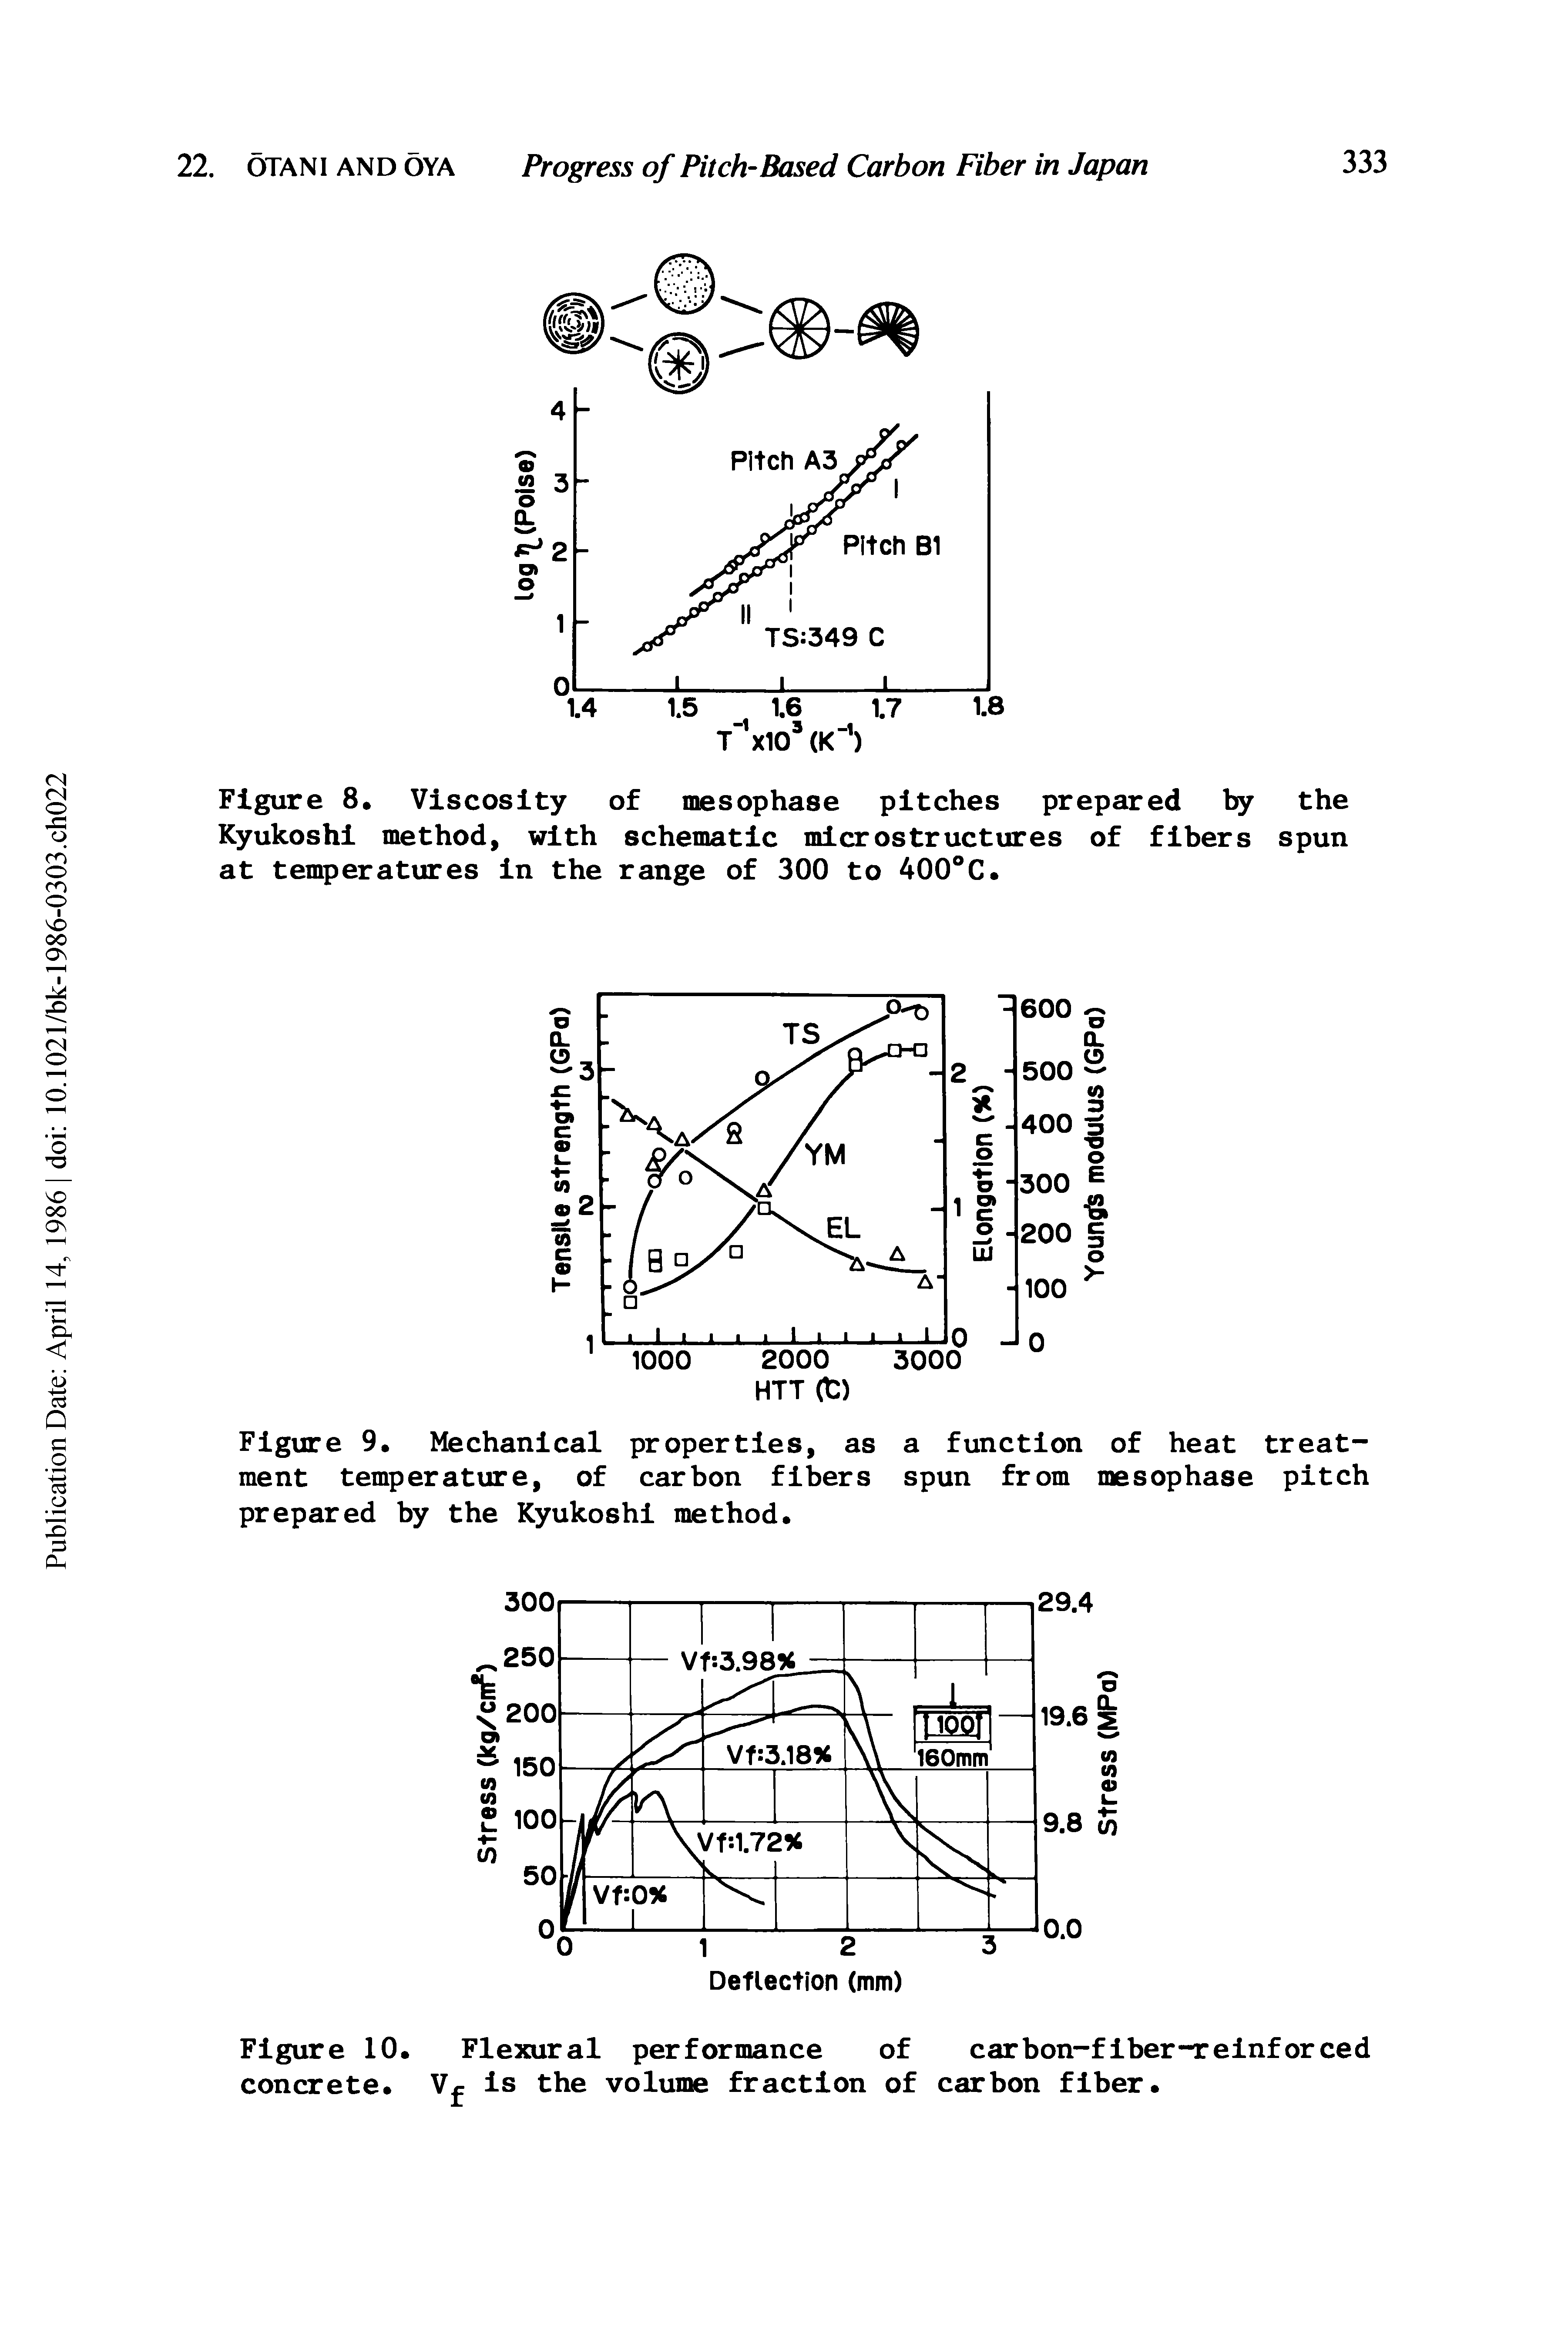 Figure 8. Viscosity of mesophase pitches prepared by the Kyukoshi method, with schematic microstructures of fibers spun at temperatures in the range of 300 to 400°C.